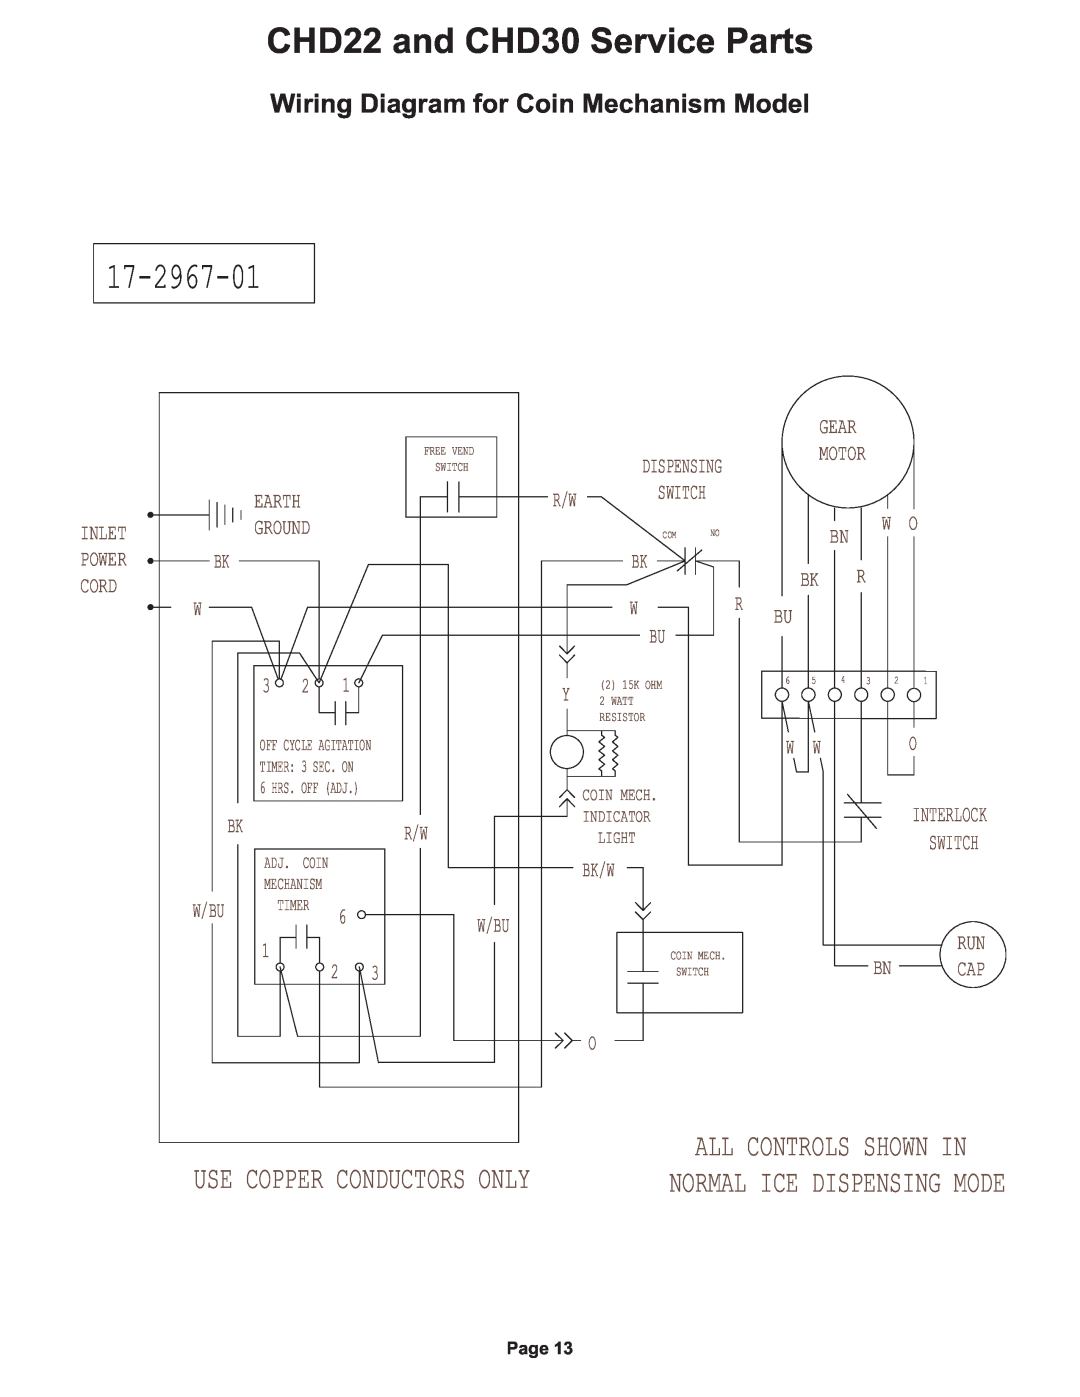 Cornelius CHD22 and CHD30 Service Parts, 17-2967-01, All Controls Shown In, Use Copper Conductors Only, Dispensing 